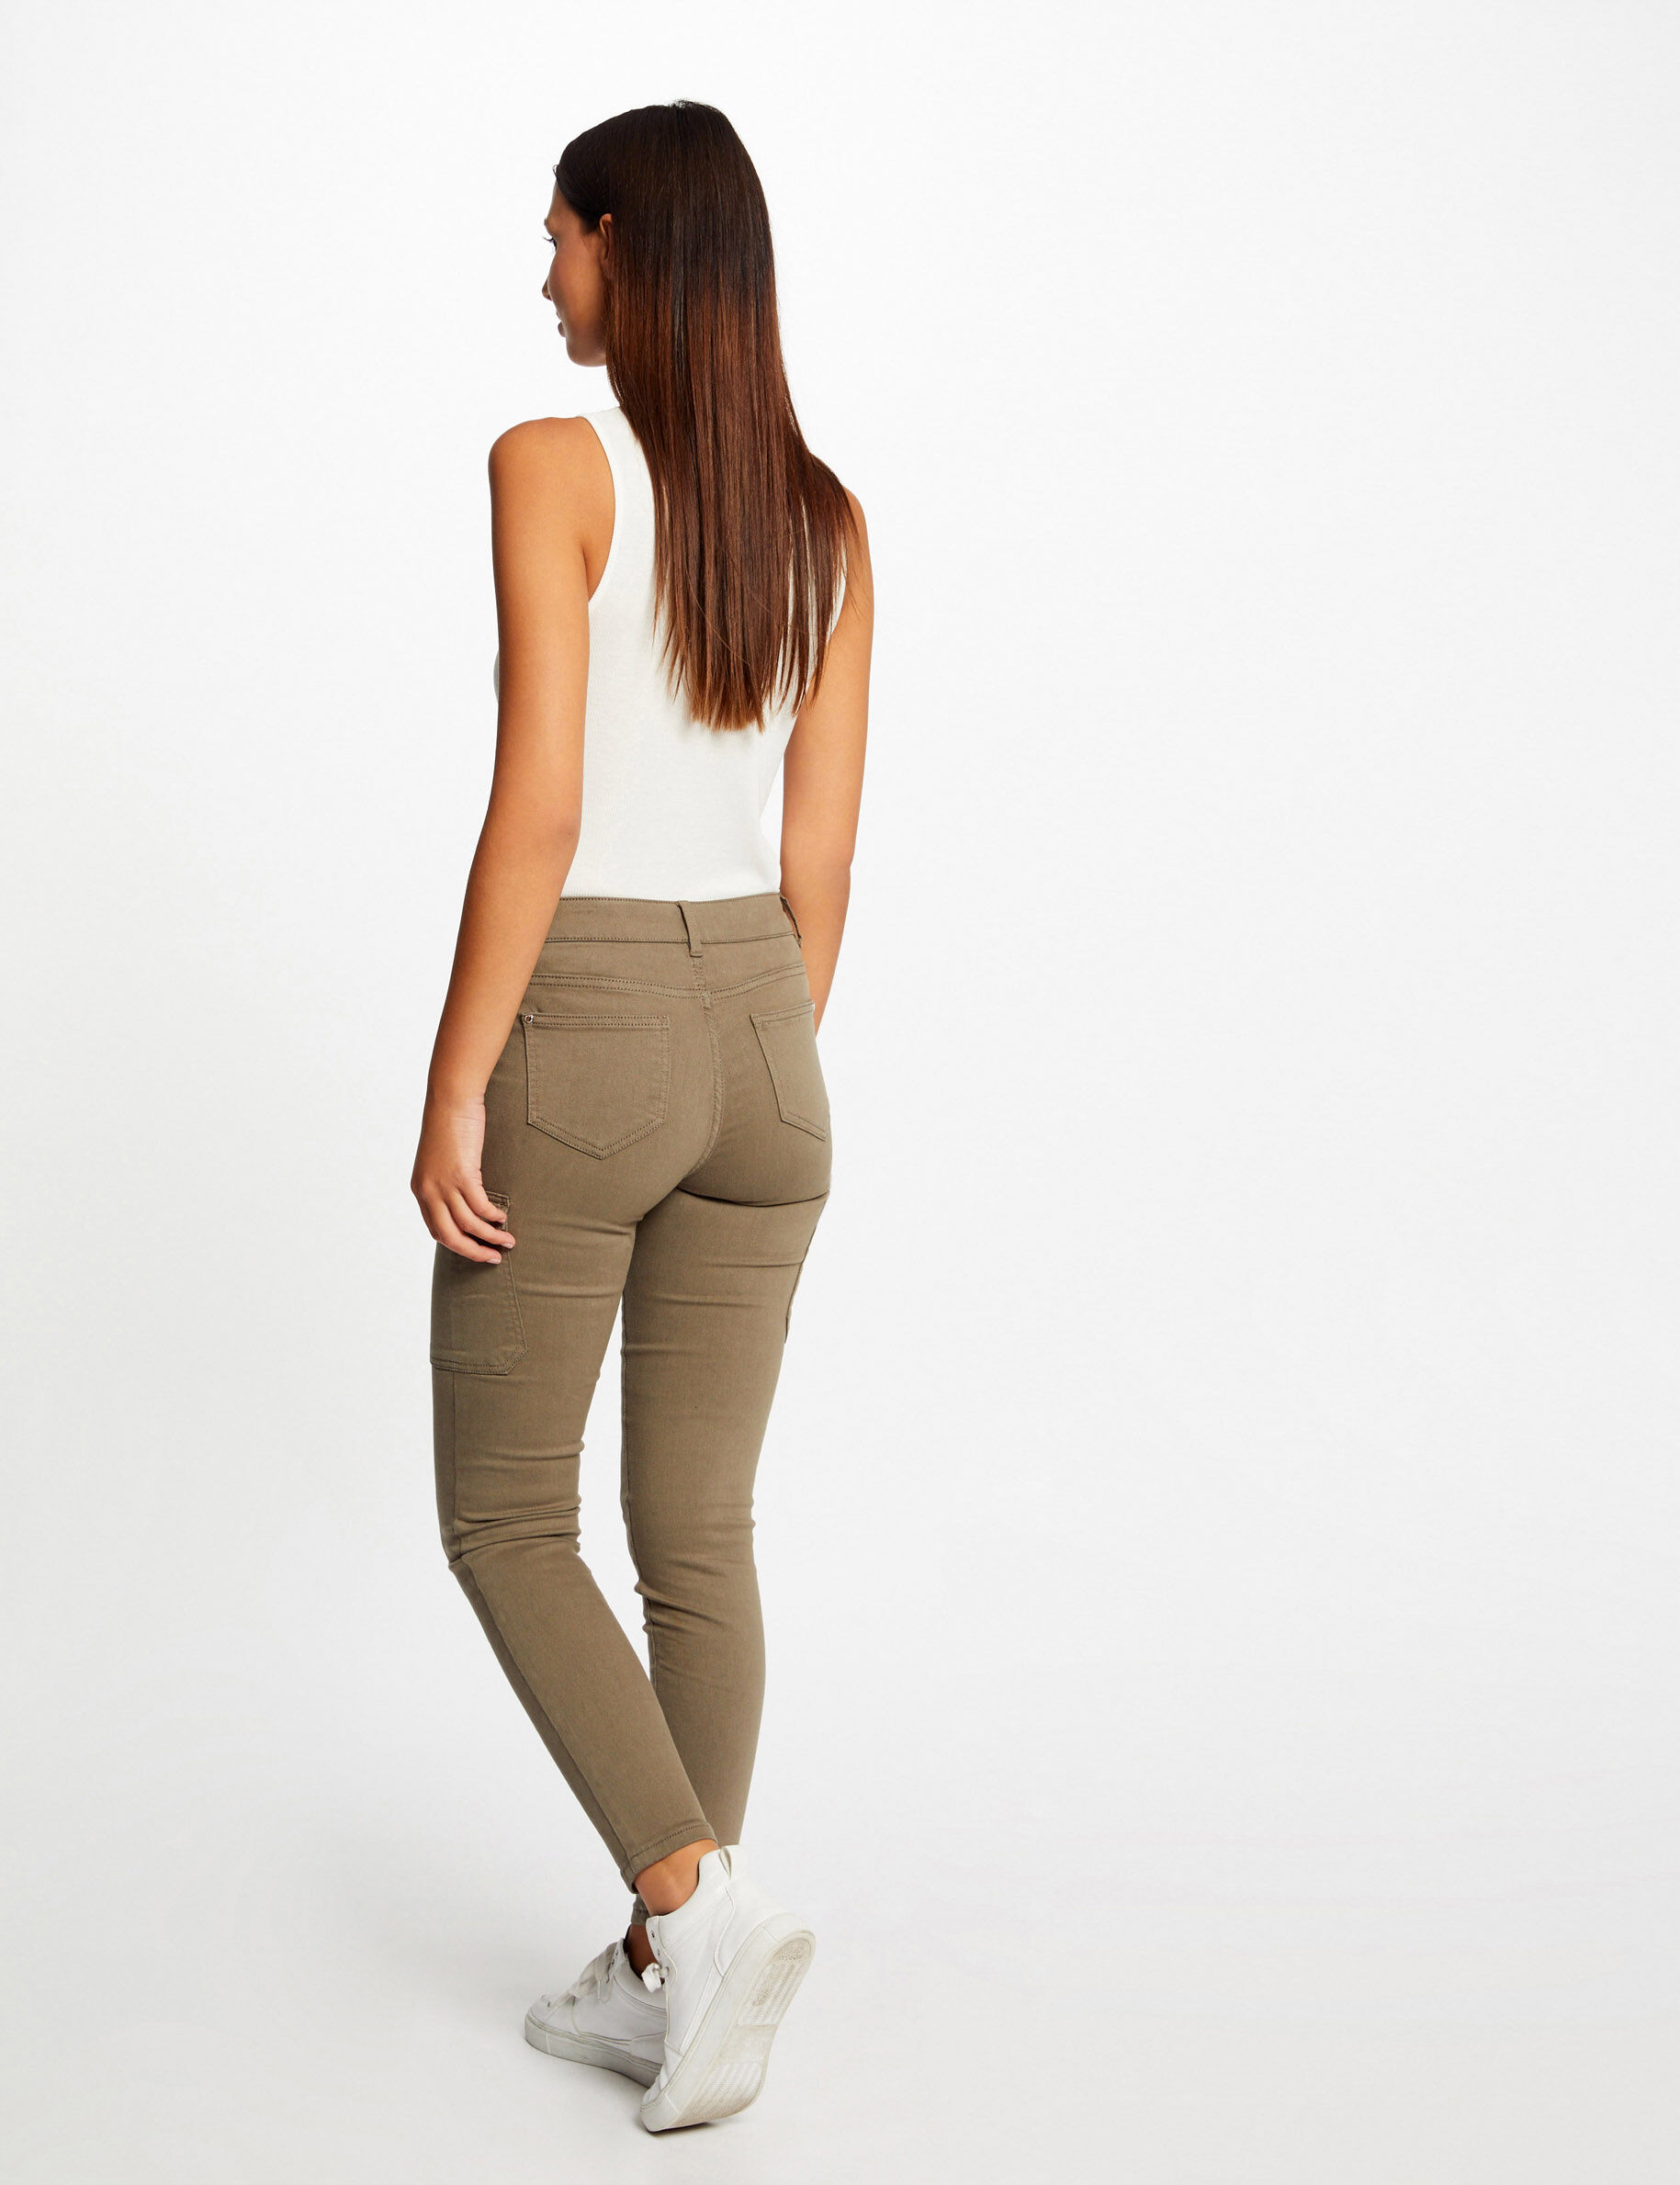 Buy French Connection Men Khaki Skinny Fit Trousers - Trousers for Men  490299 | Myntra